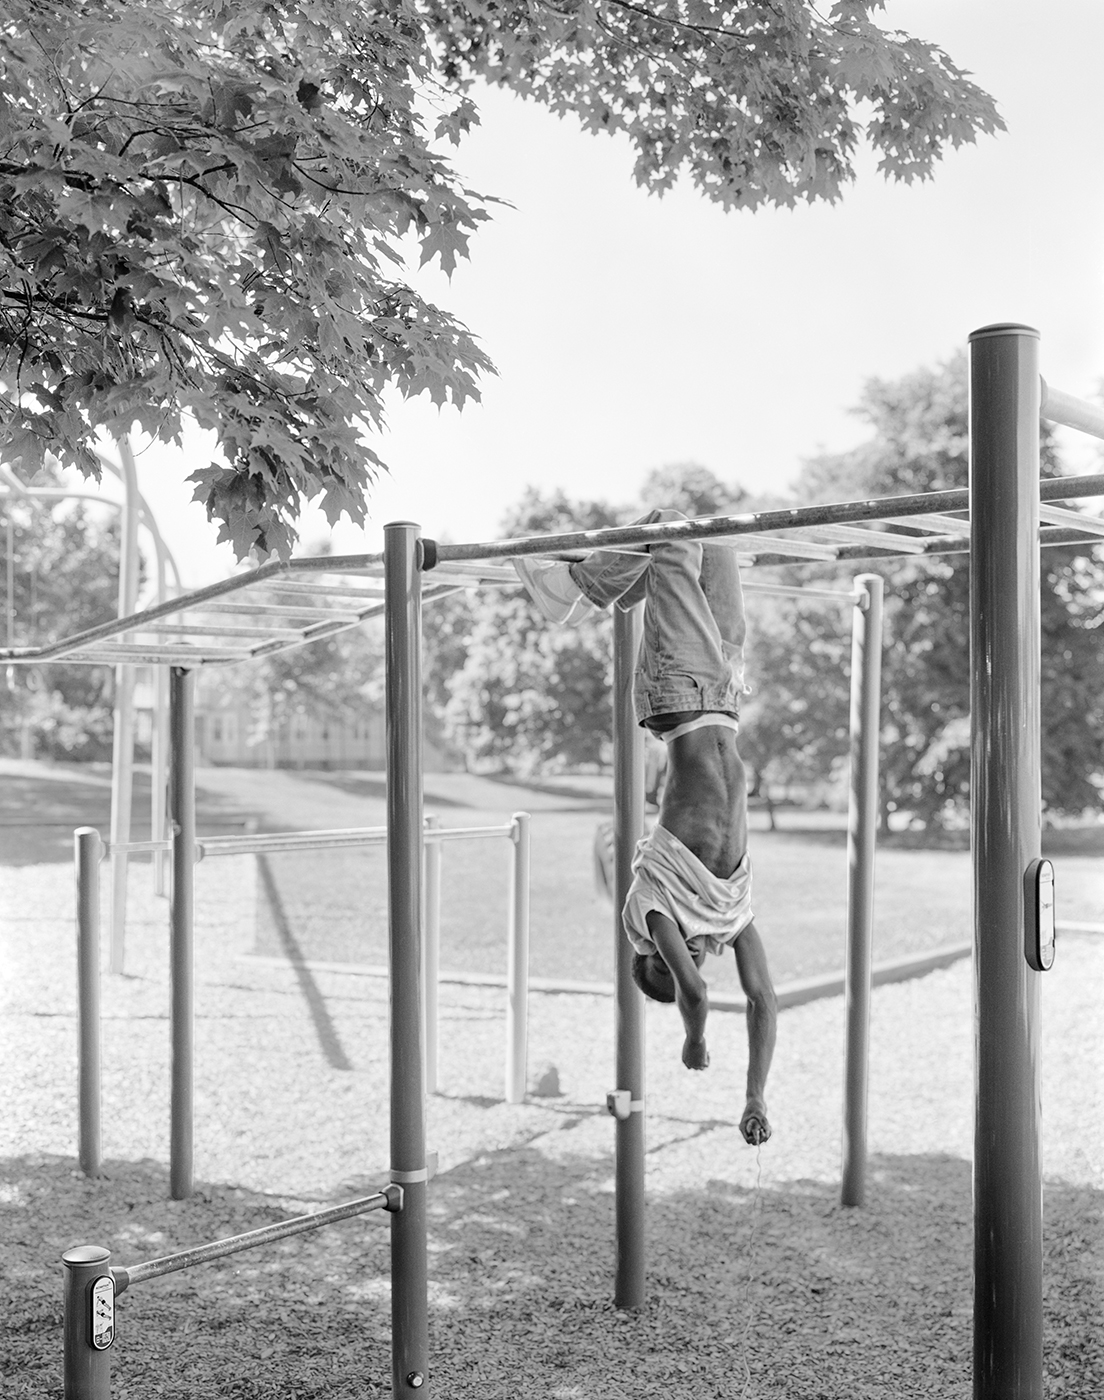 Photograph; a Black person hanging upside down from monkey bars in a playground.